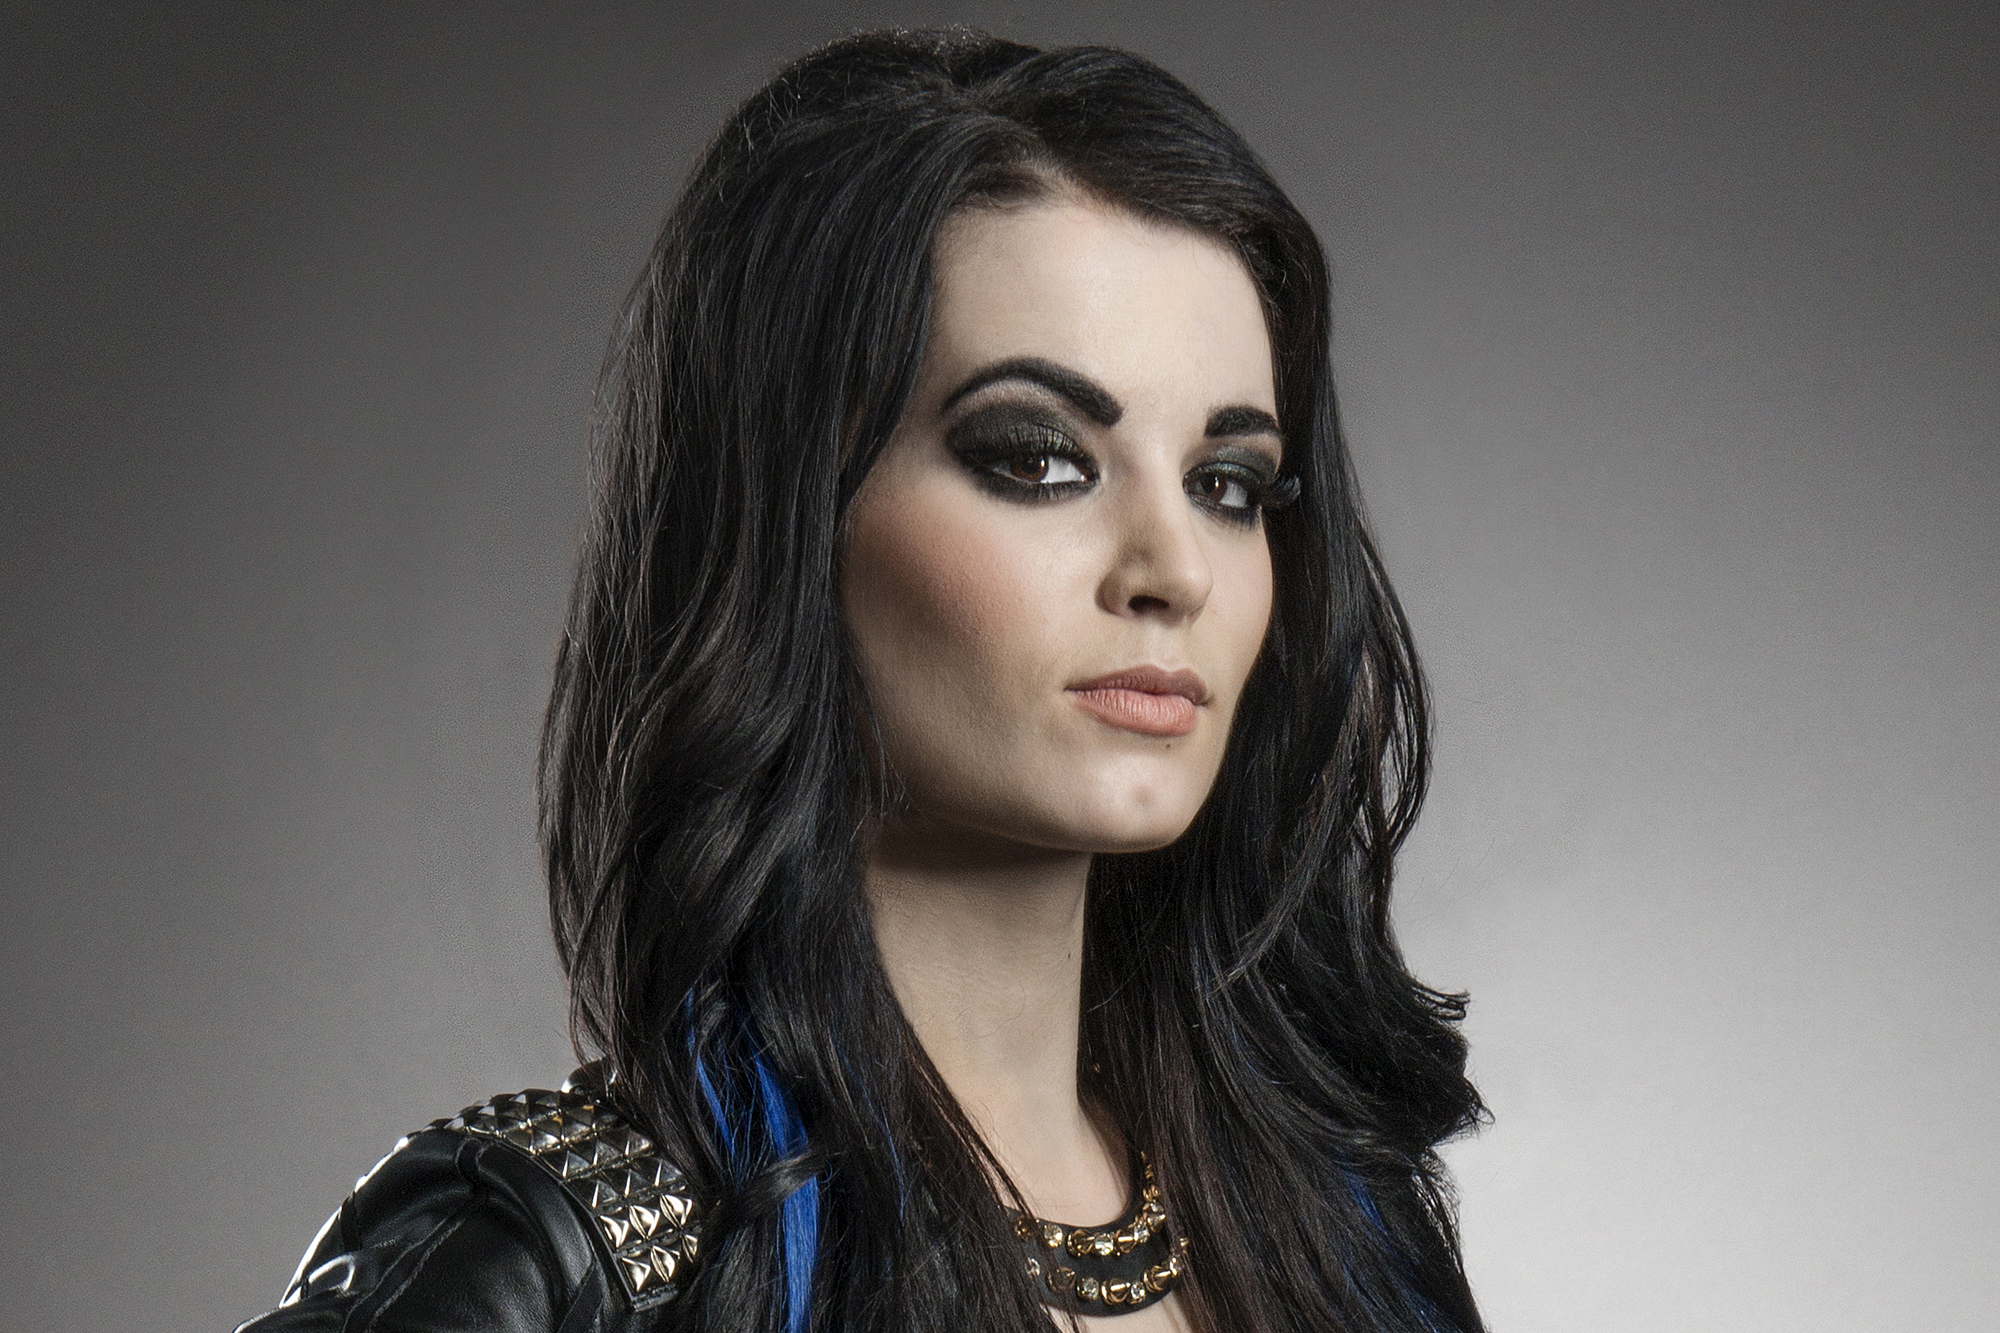 chris barrass recommends wwe paige nsfw pic